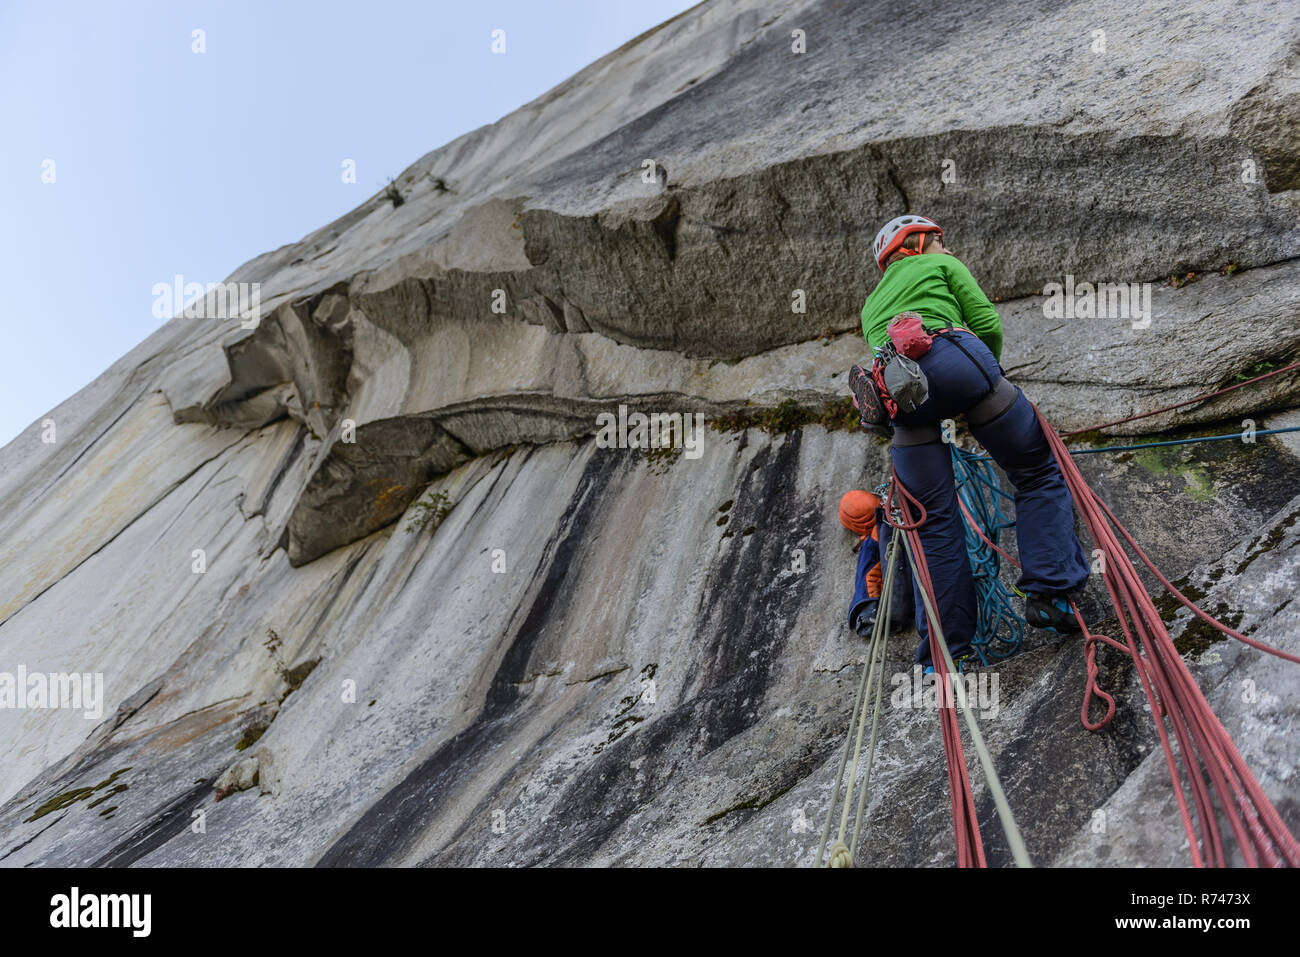 Young female rock climber climbing rock face, low angle view, The Chief, Squamish, British Columbia, Canada Stock Photo